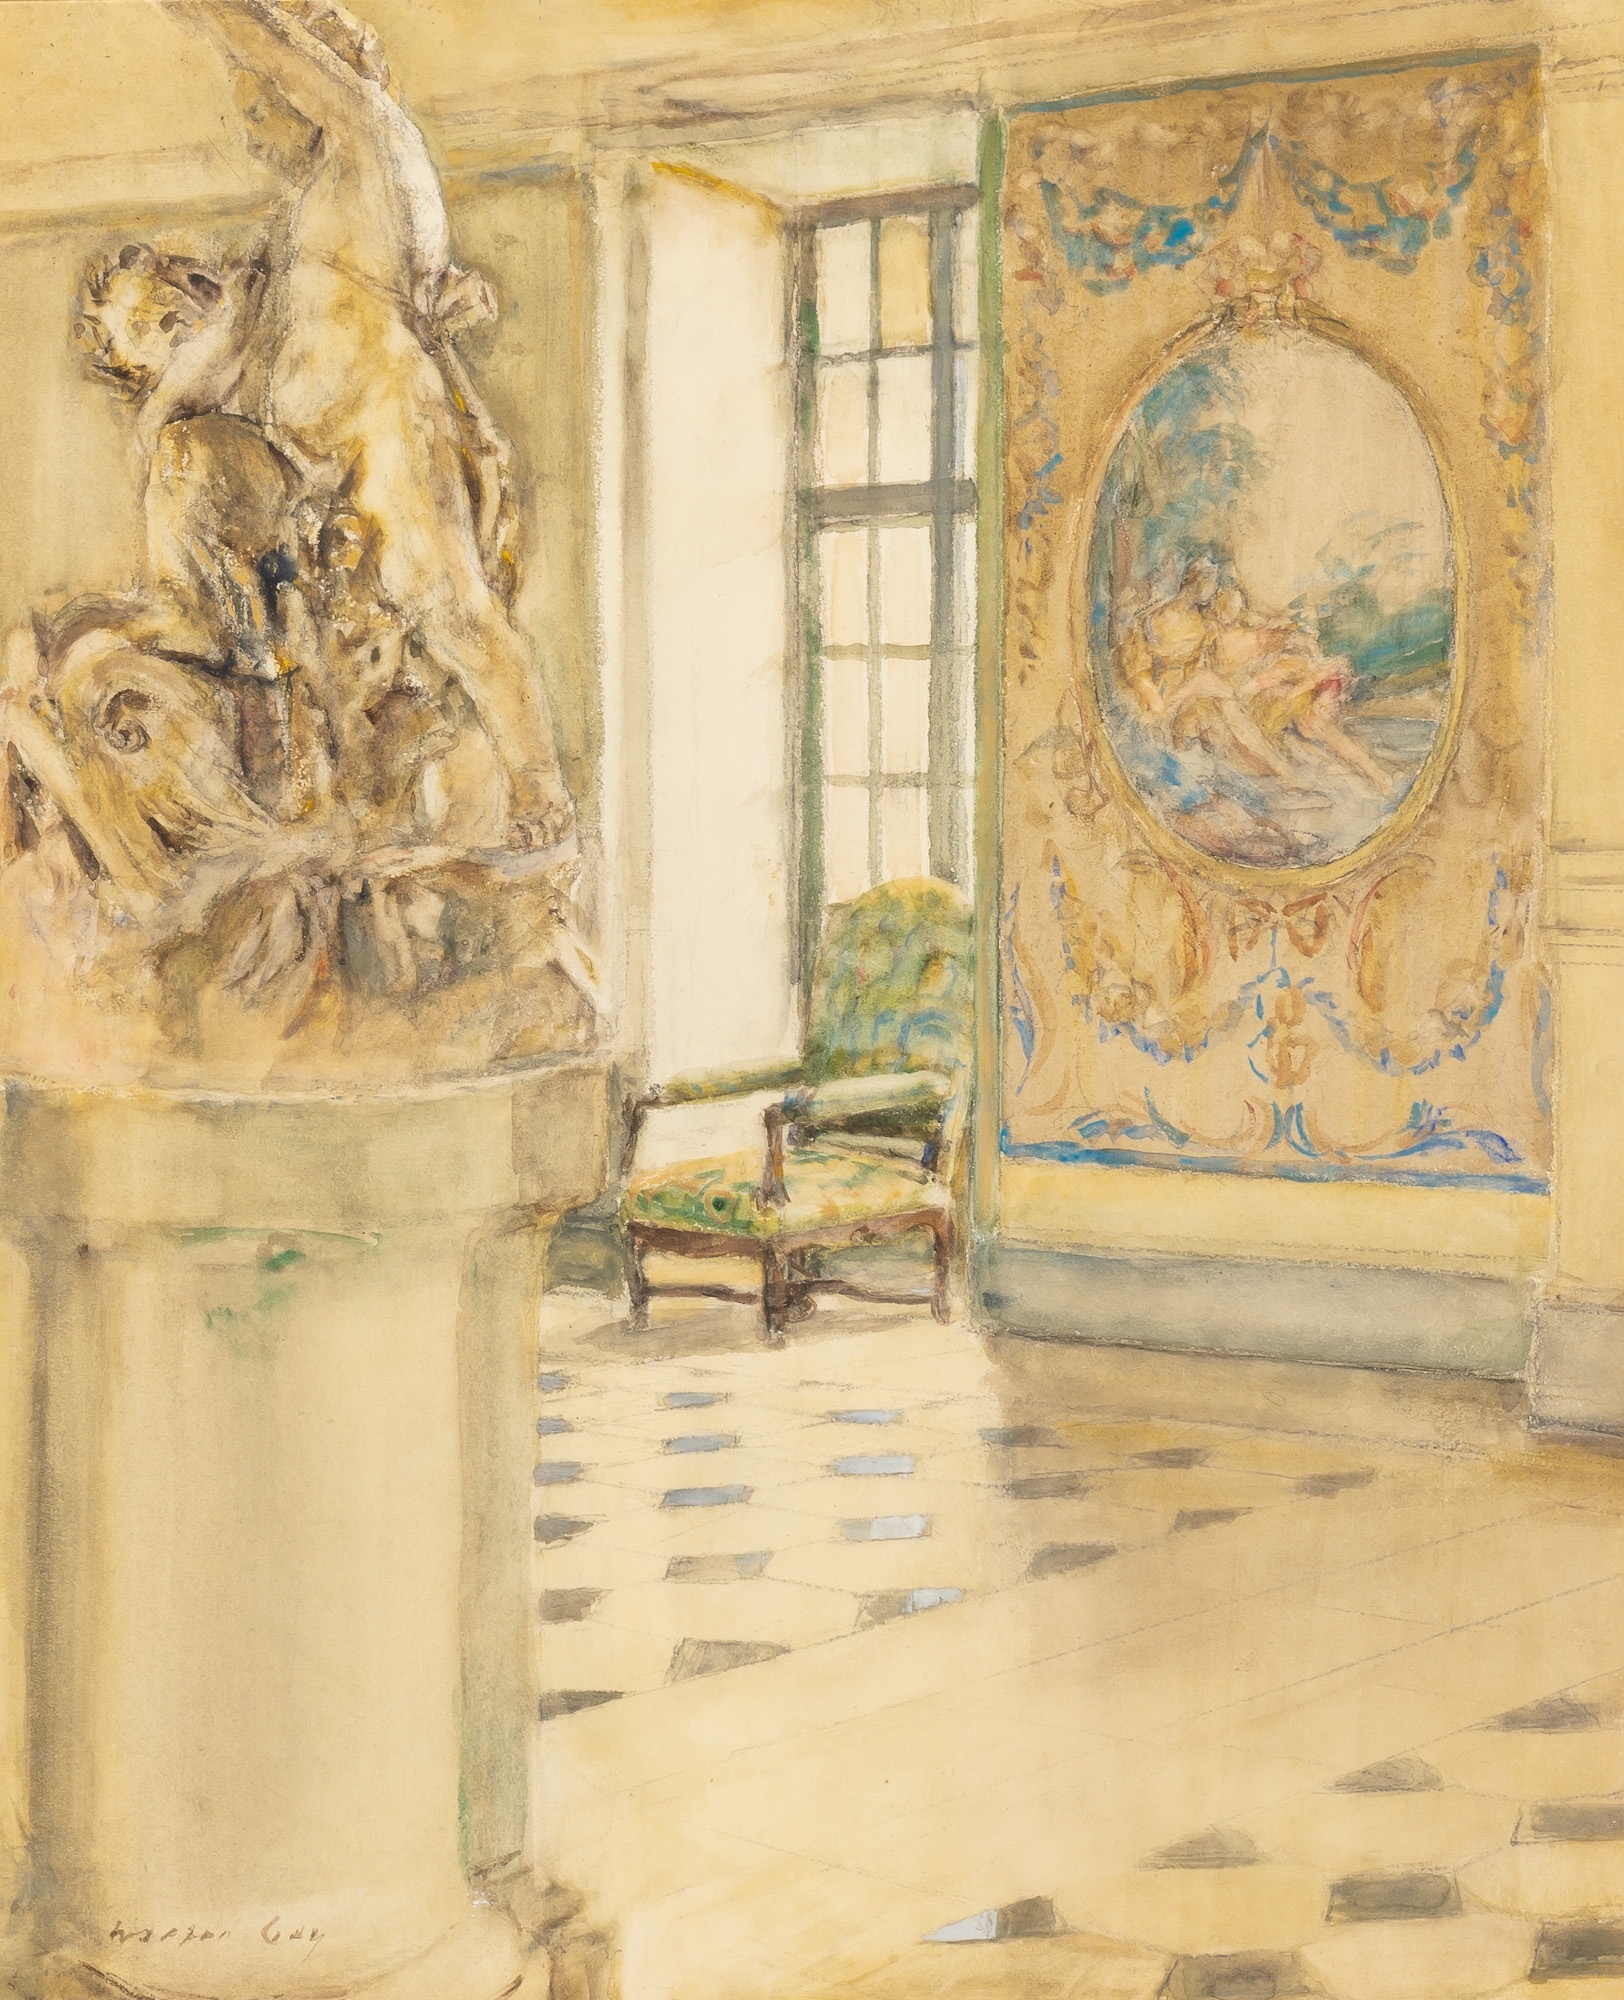 Artwork by Walter Gay, Chateau Le Breau, Made of Watercolor on paper